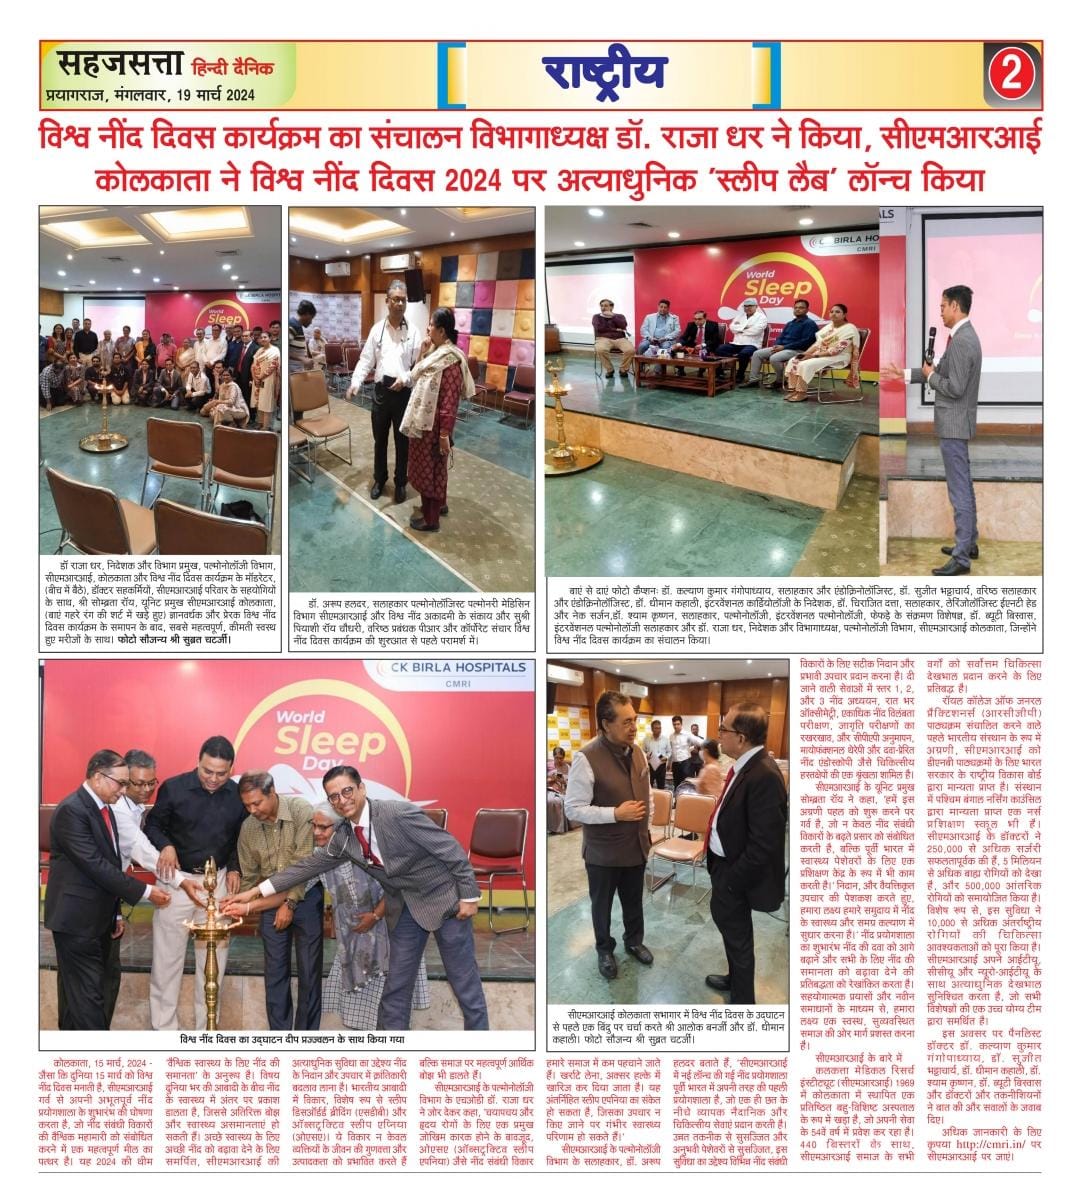 The World Sleep Day programme was conducted by Dr. Raja Dhar